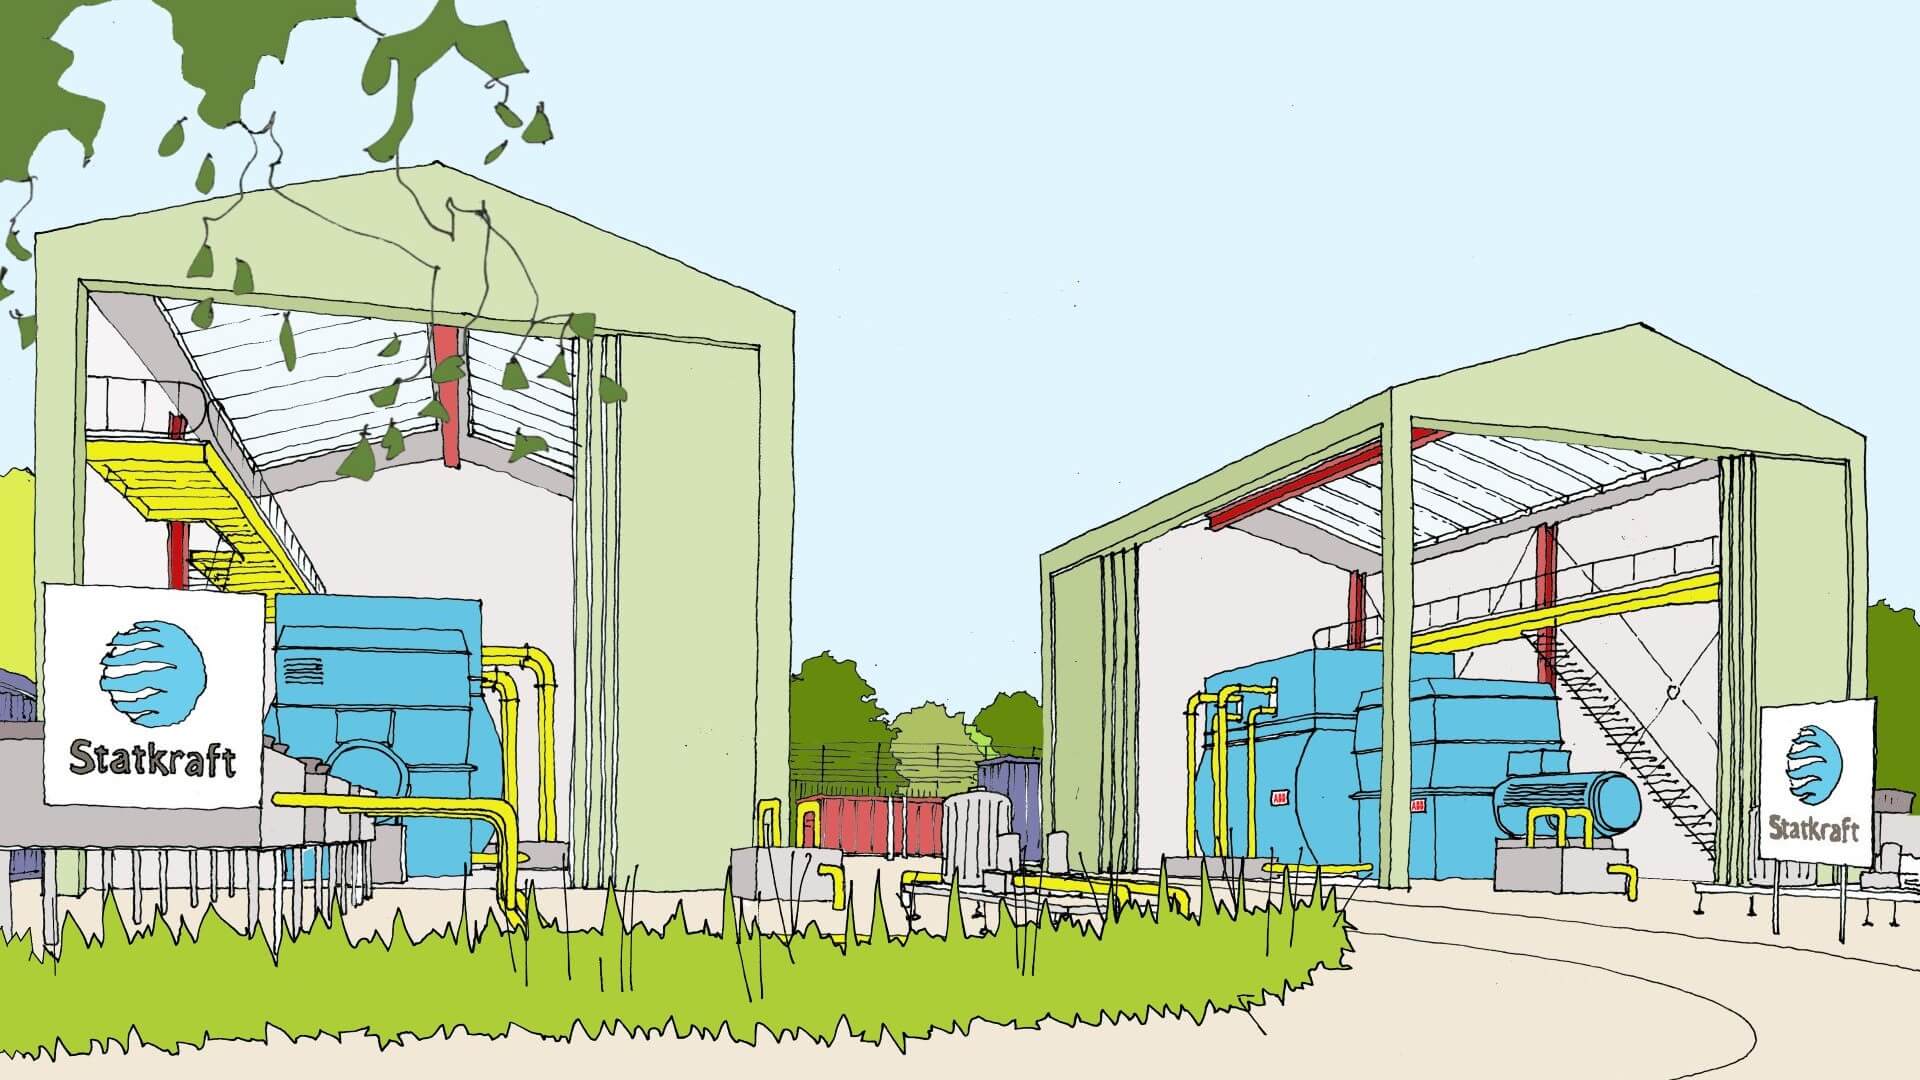 Artist’s impression of the Lister Drive Greener Grid project in Liverpool